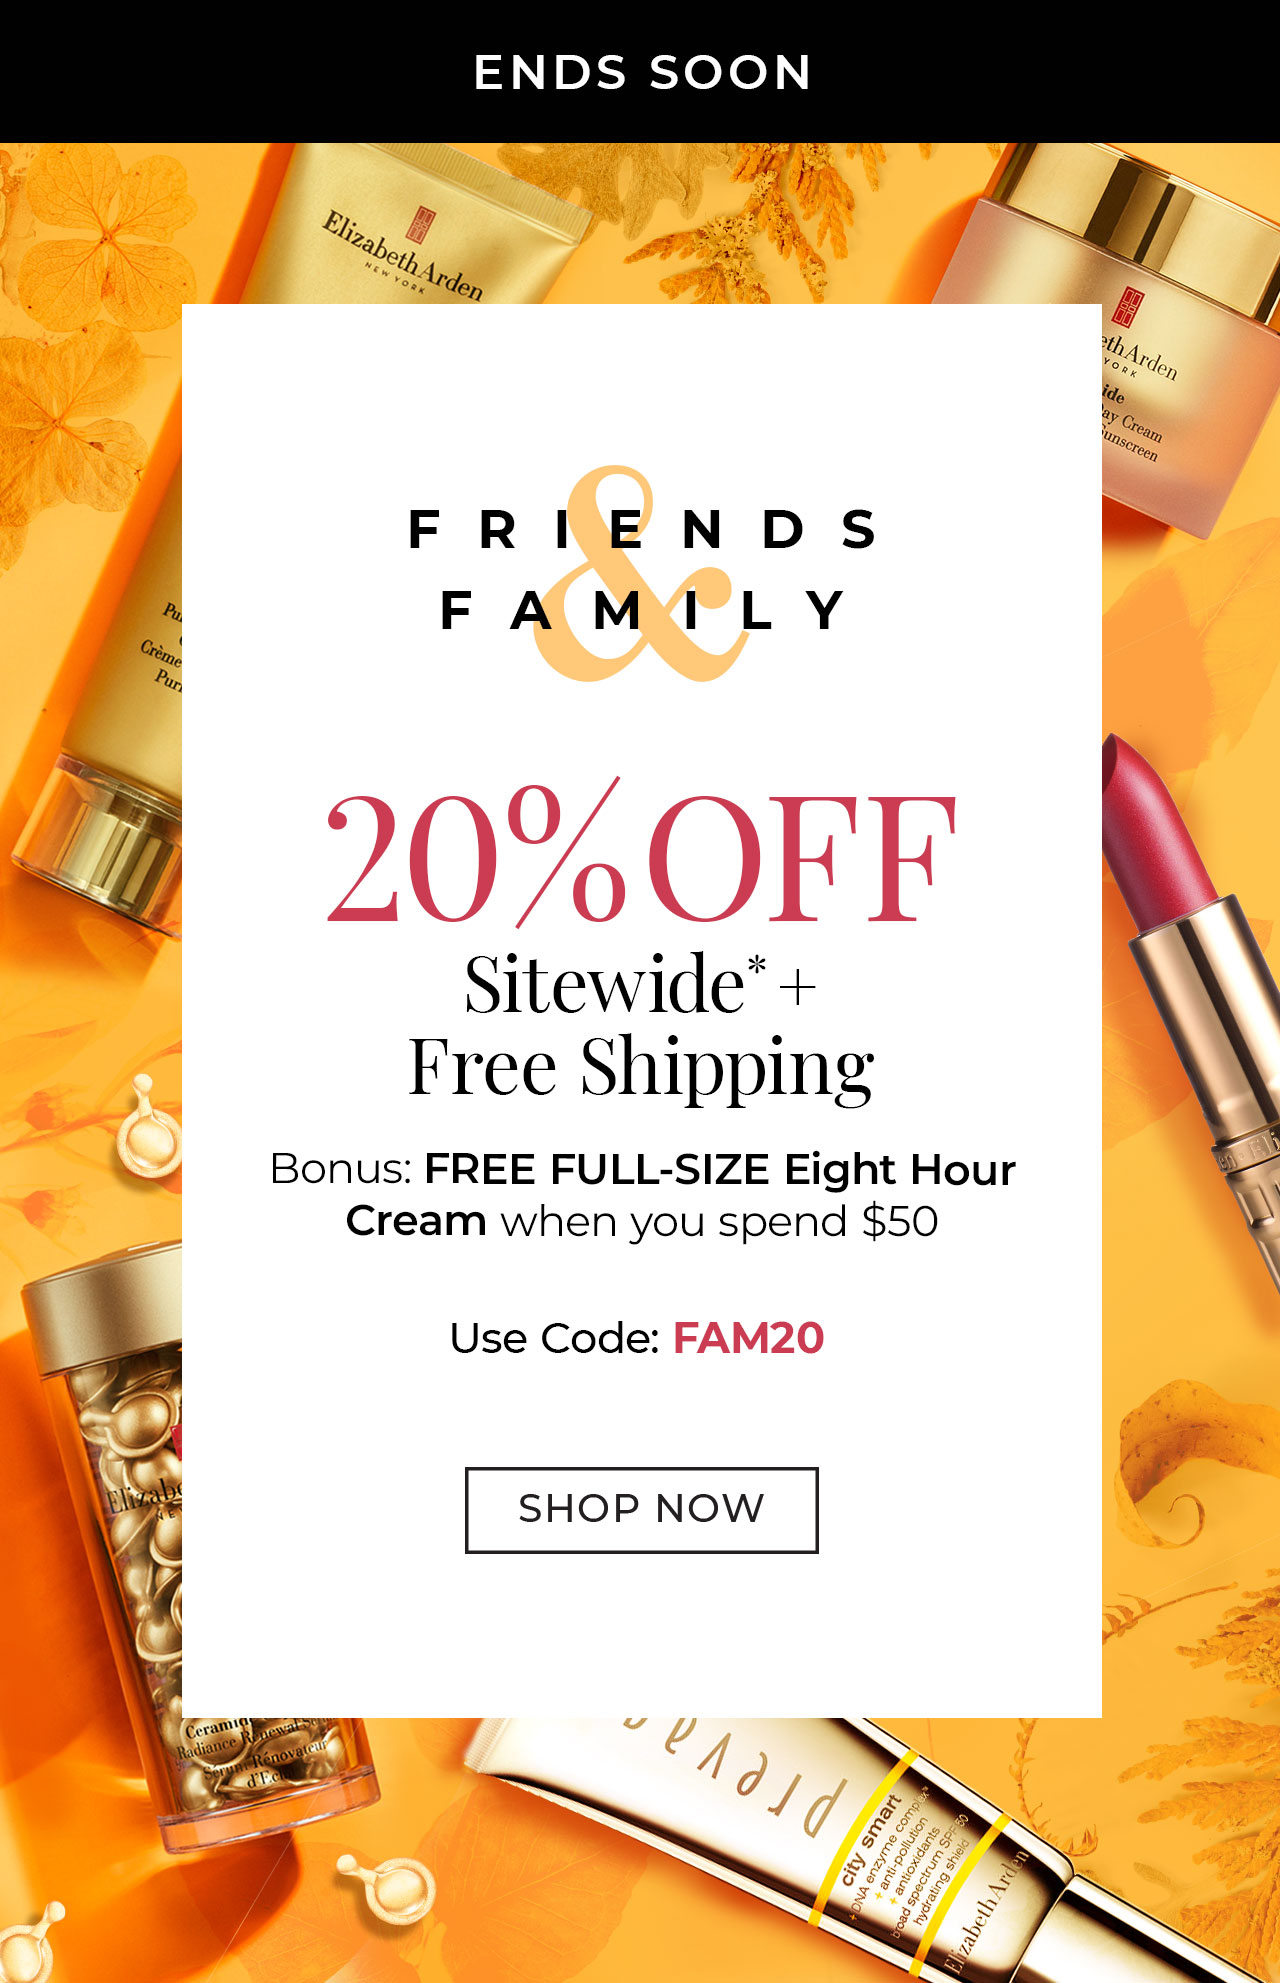 Ends Soon | Friends & Family | 20% off sitewide* + free shipping | Bonus: FREE Full-size eight hour cream when you spend $50 | Use Code: FAM20 | Shop Now